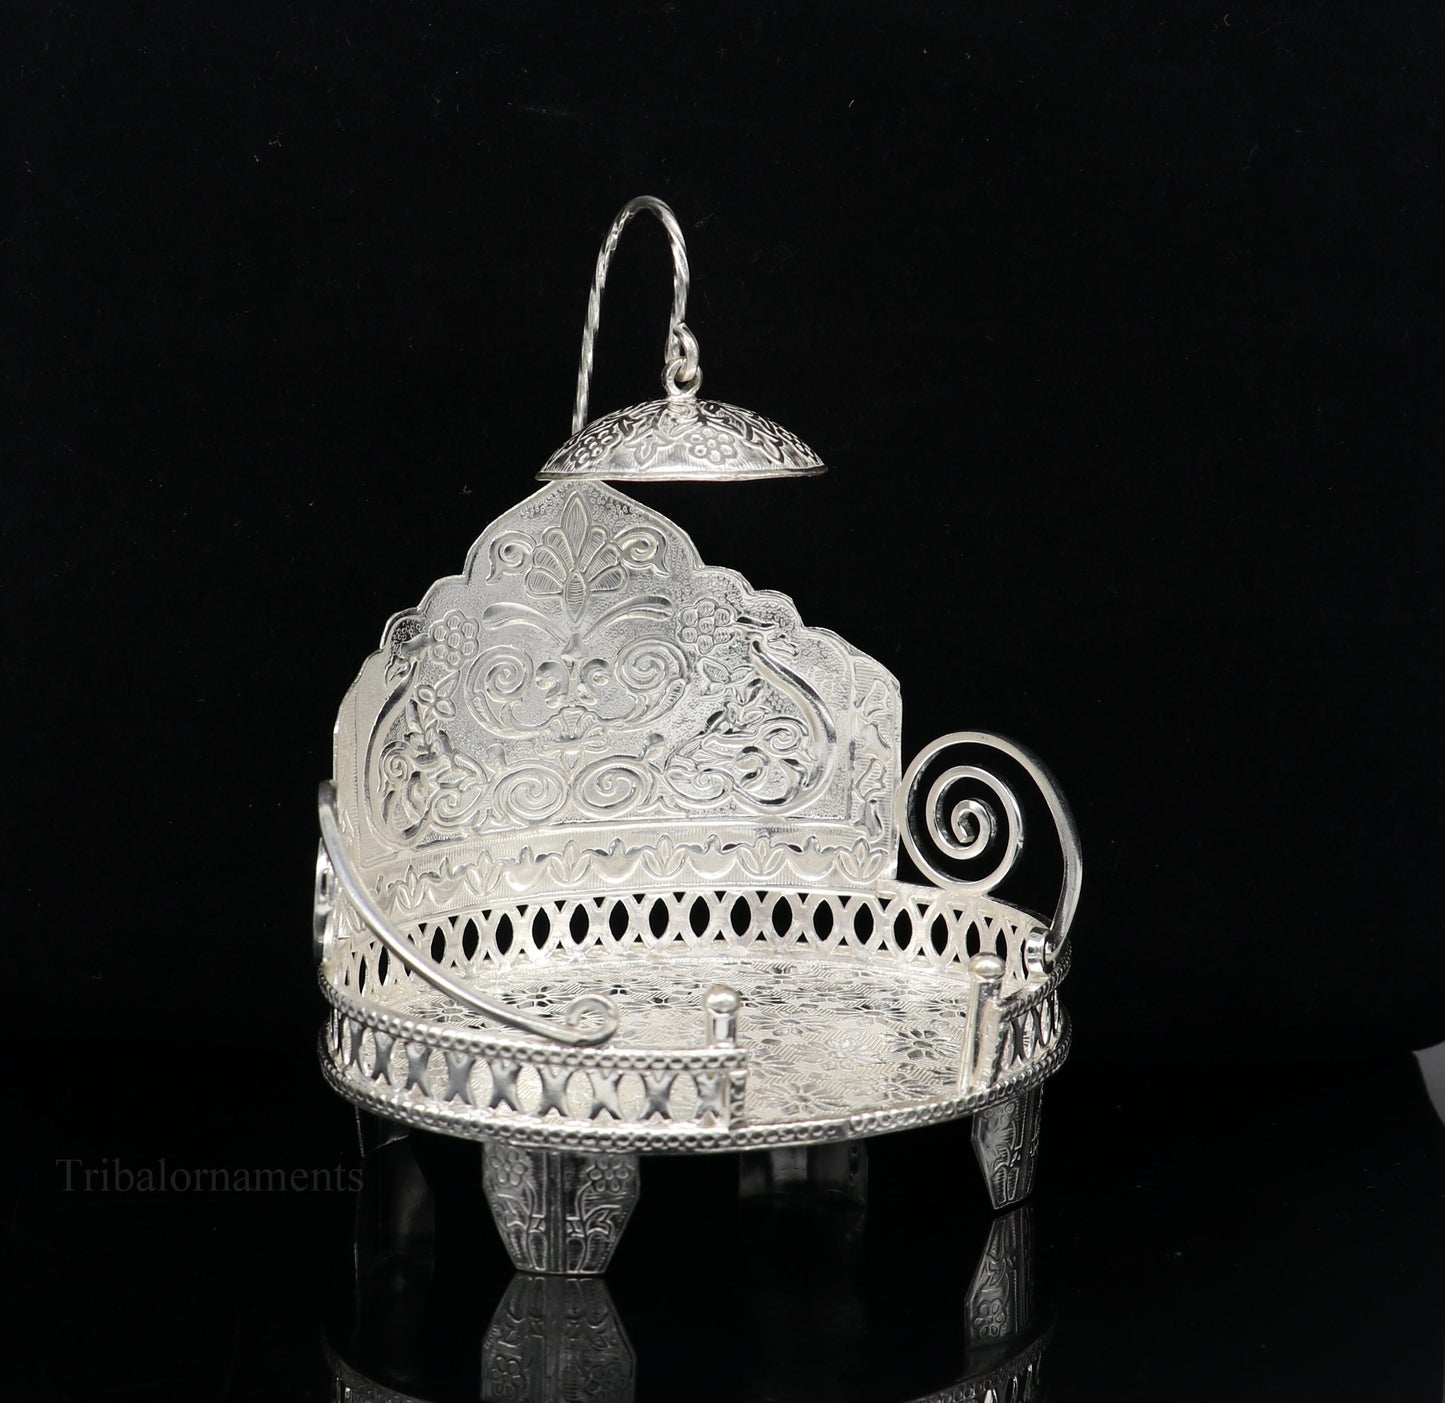 925 pure sterling silver Handmade Divine Singhasan, idol Silver throne, god statue's stand chair, temple art puja article india su487 - TRIBAL ORNAMENTS